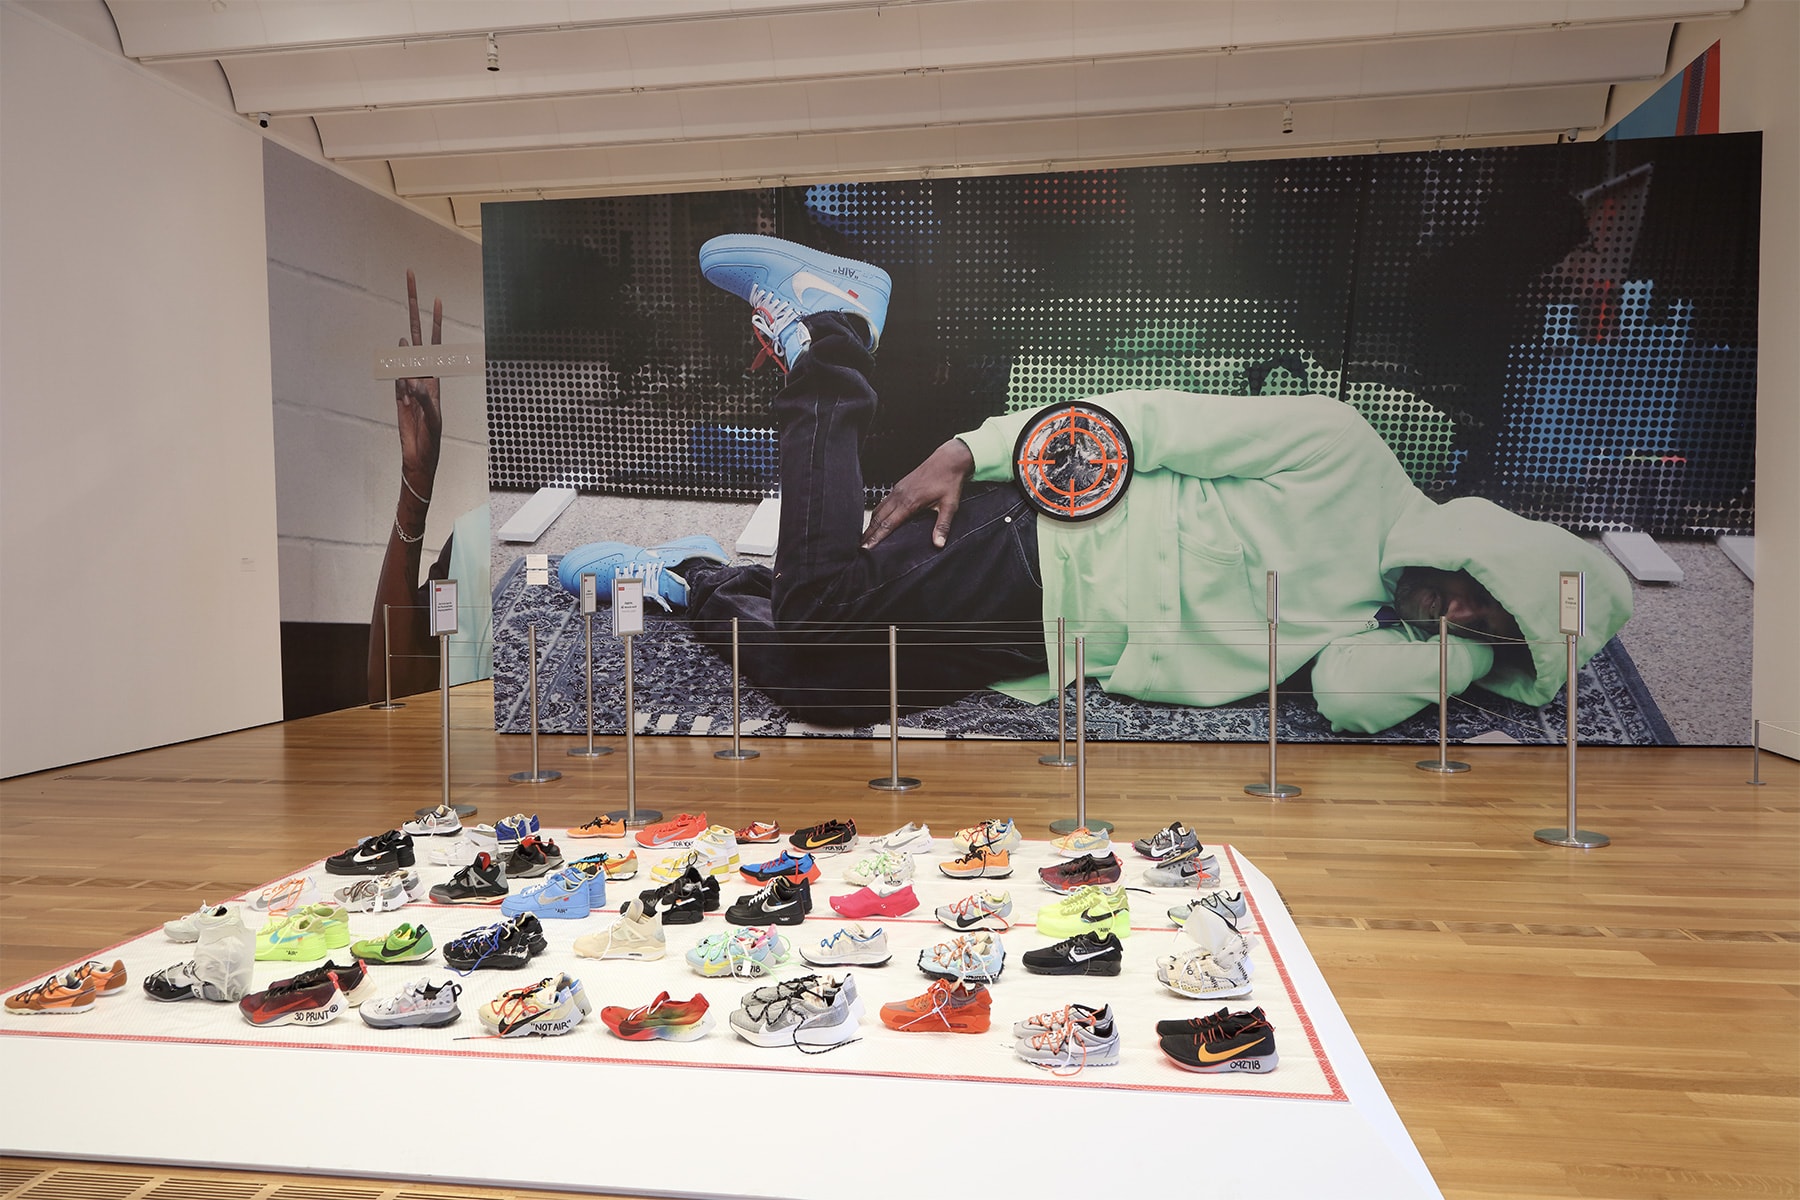 Virgil Abloh "Figures of Speech" Atlanta Exhibition Recap images inside look high museum of art FOS louis vuitton nike collaborations paintings artworks sculptures installations off-white 